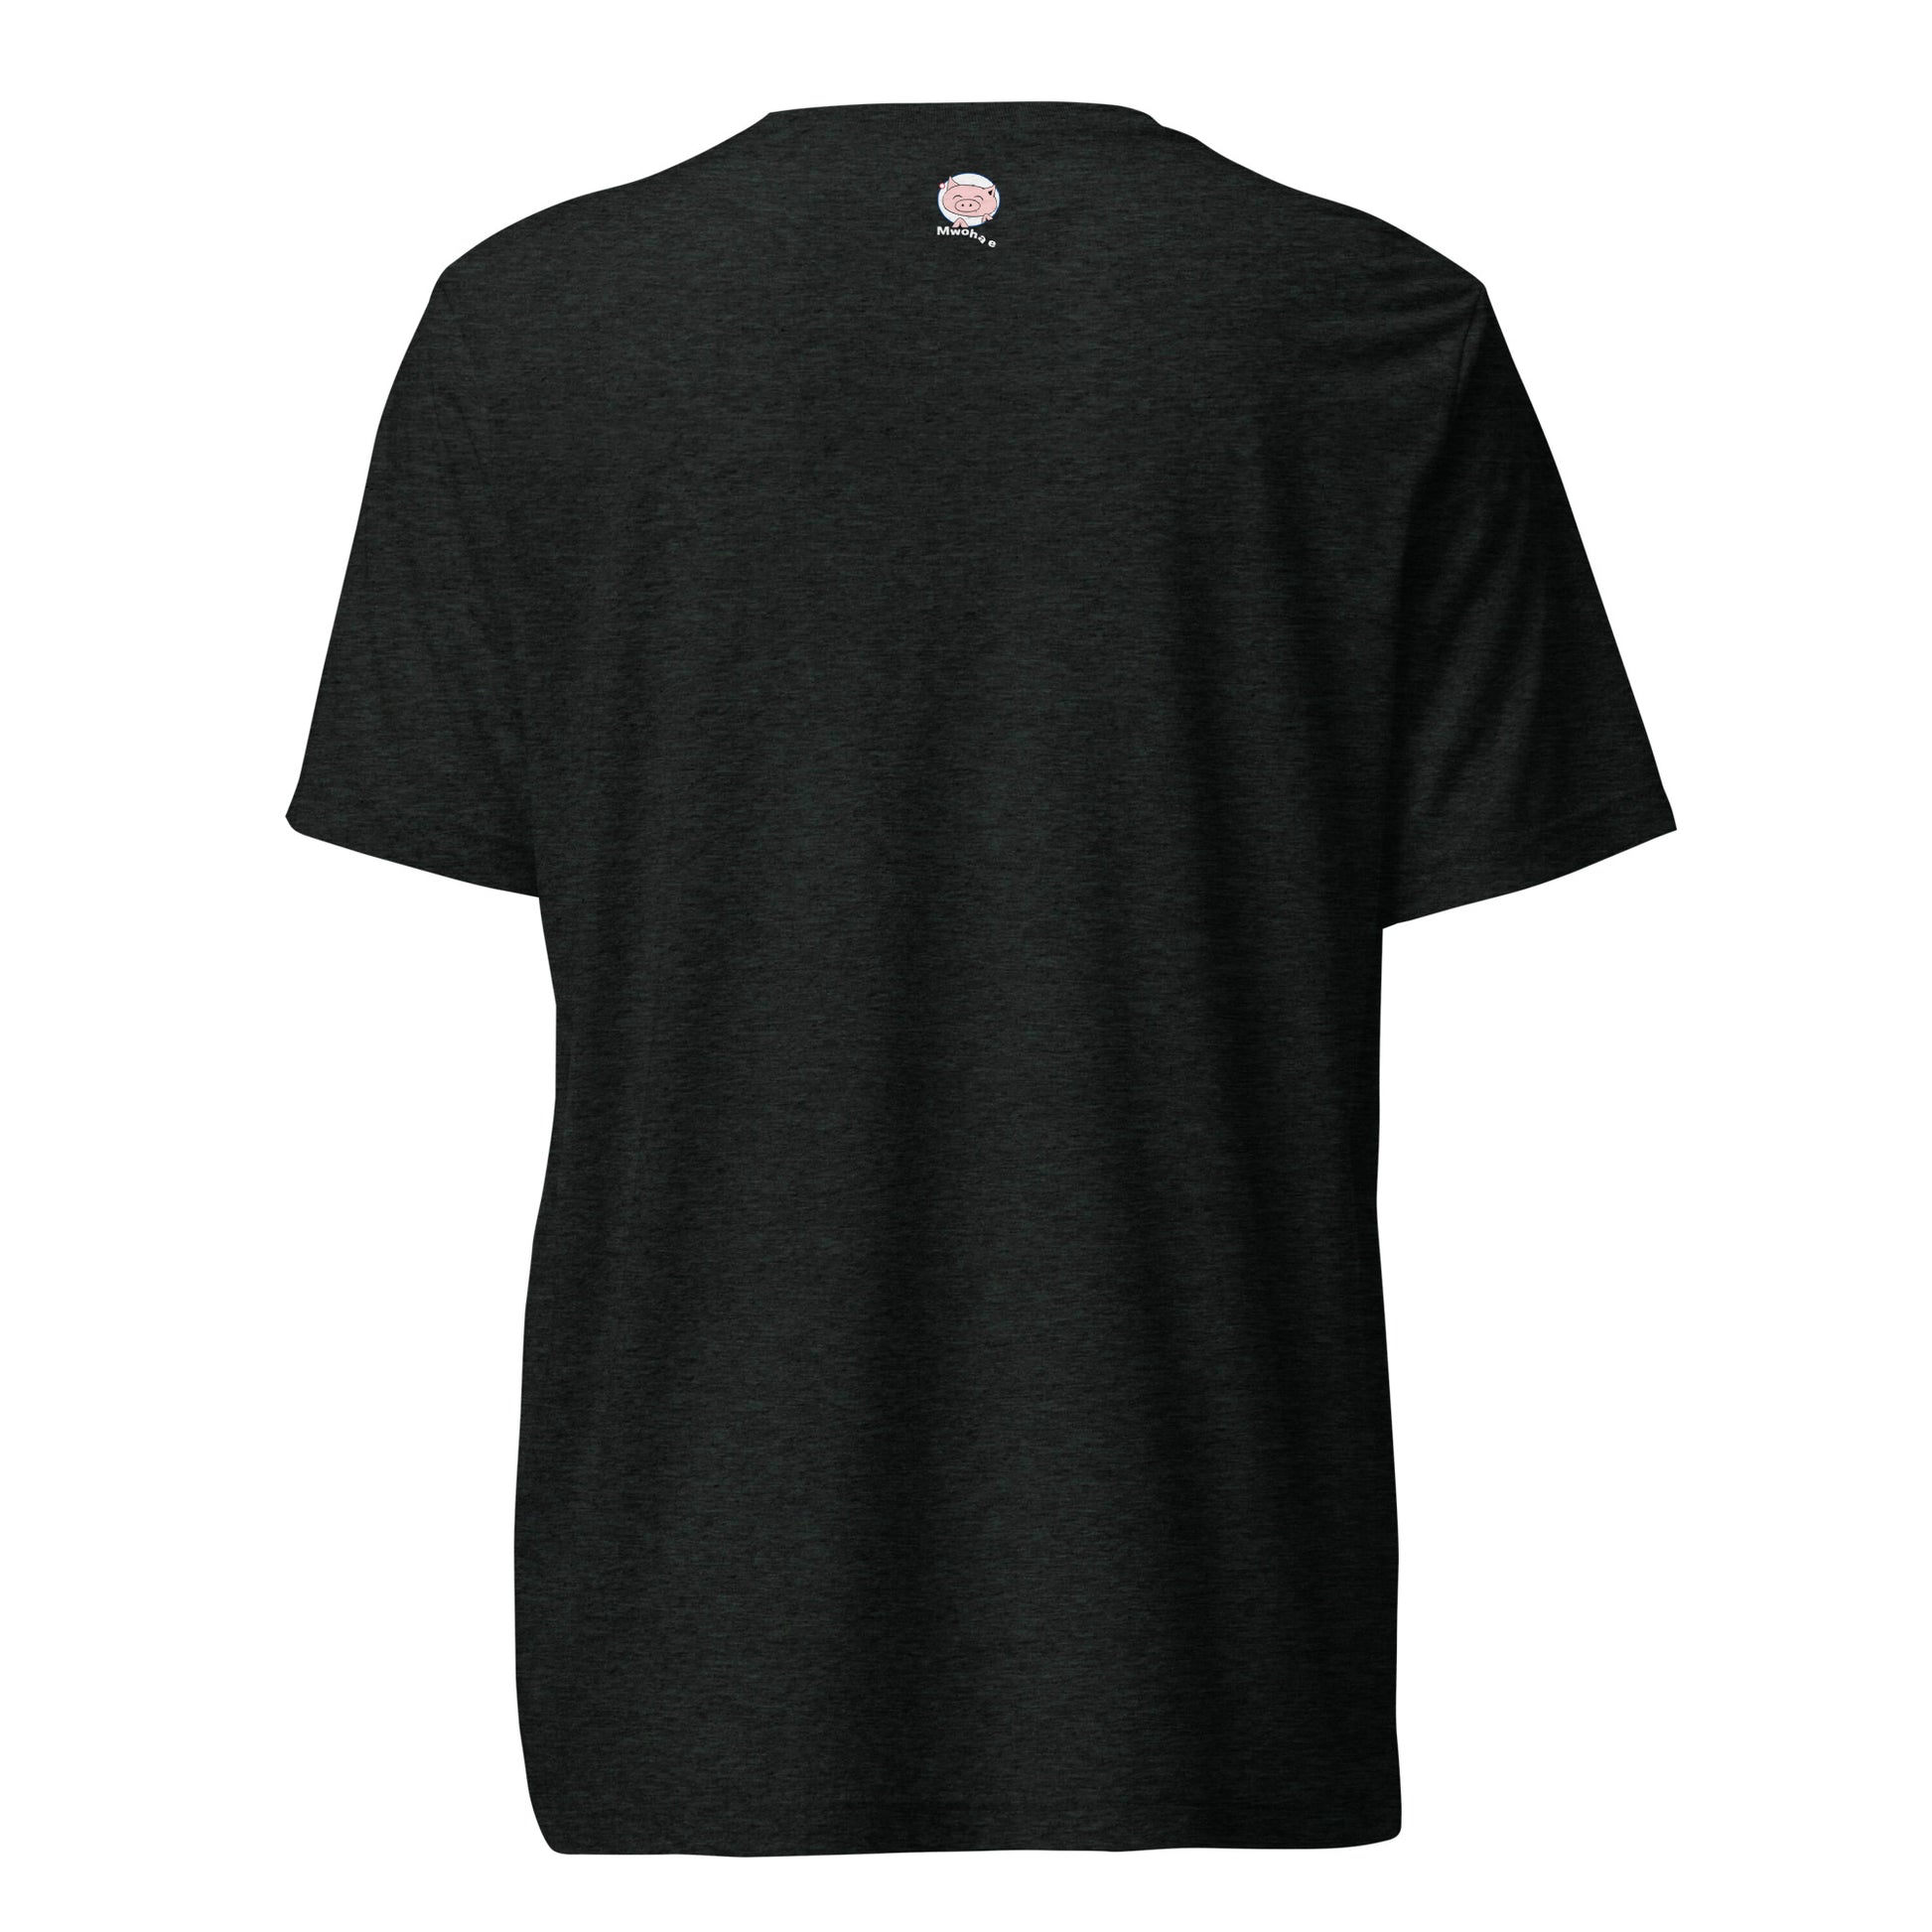 Black extra soft T-shirt with small Mwohae logo on the back